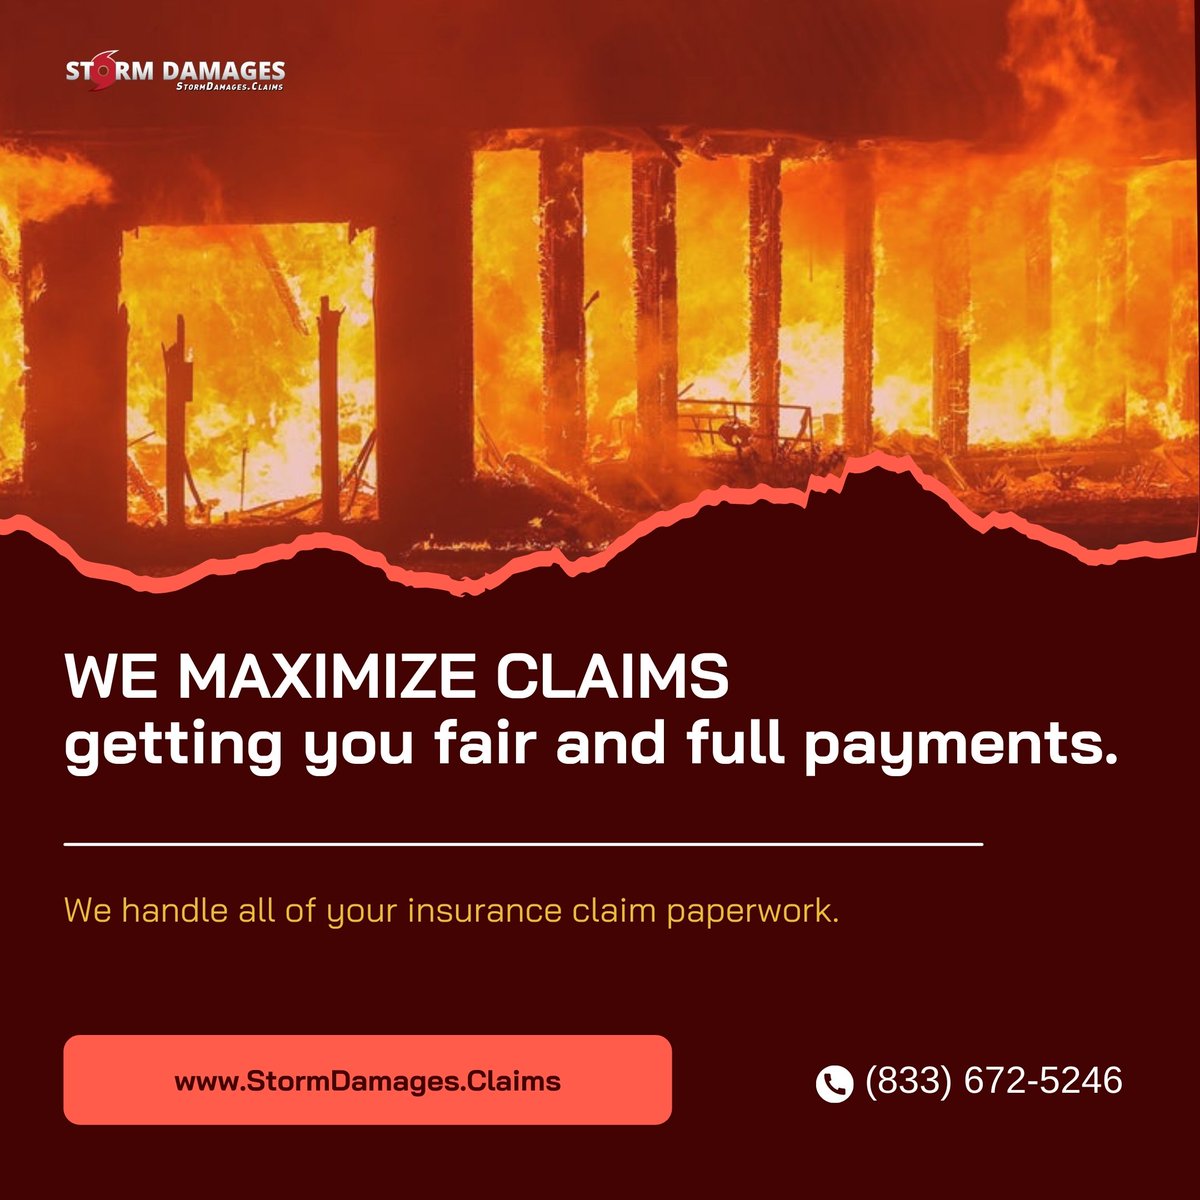 We maximize claims getting you fair and full payments. We handle all of your insurance claim paperwork. #Insuranceclaims #FireDamage #FloodDamage #WaterDamage #stormdamages #tornadoes #floods #hurricanes #InsuranceCompany #commercialinsurance #insuranceloss #securetheproperty